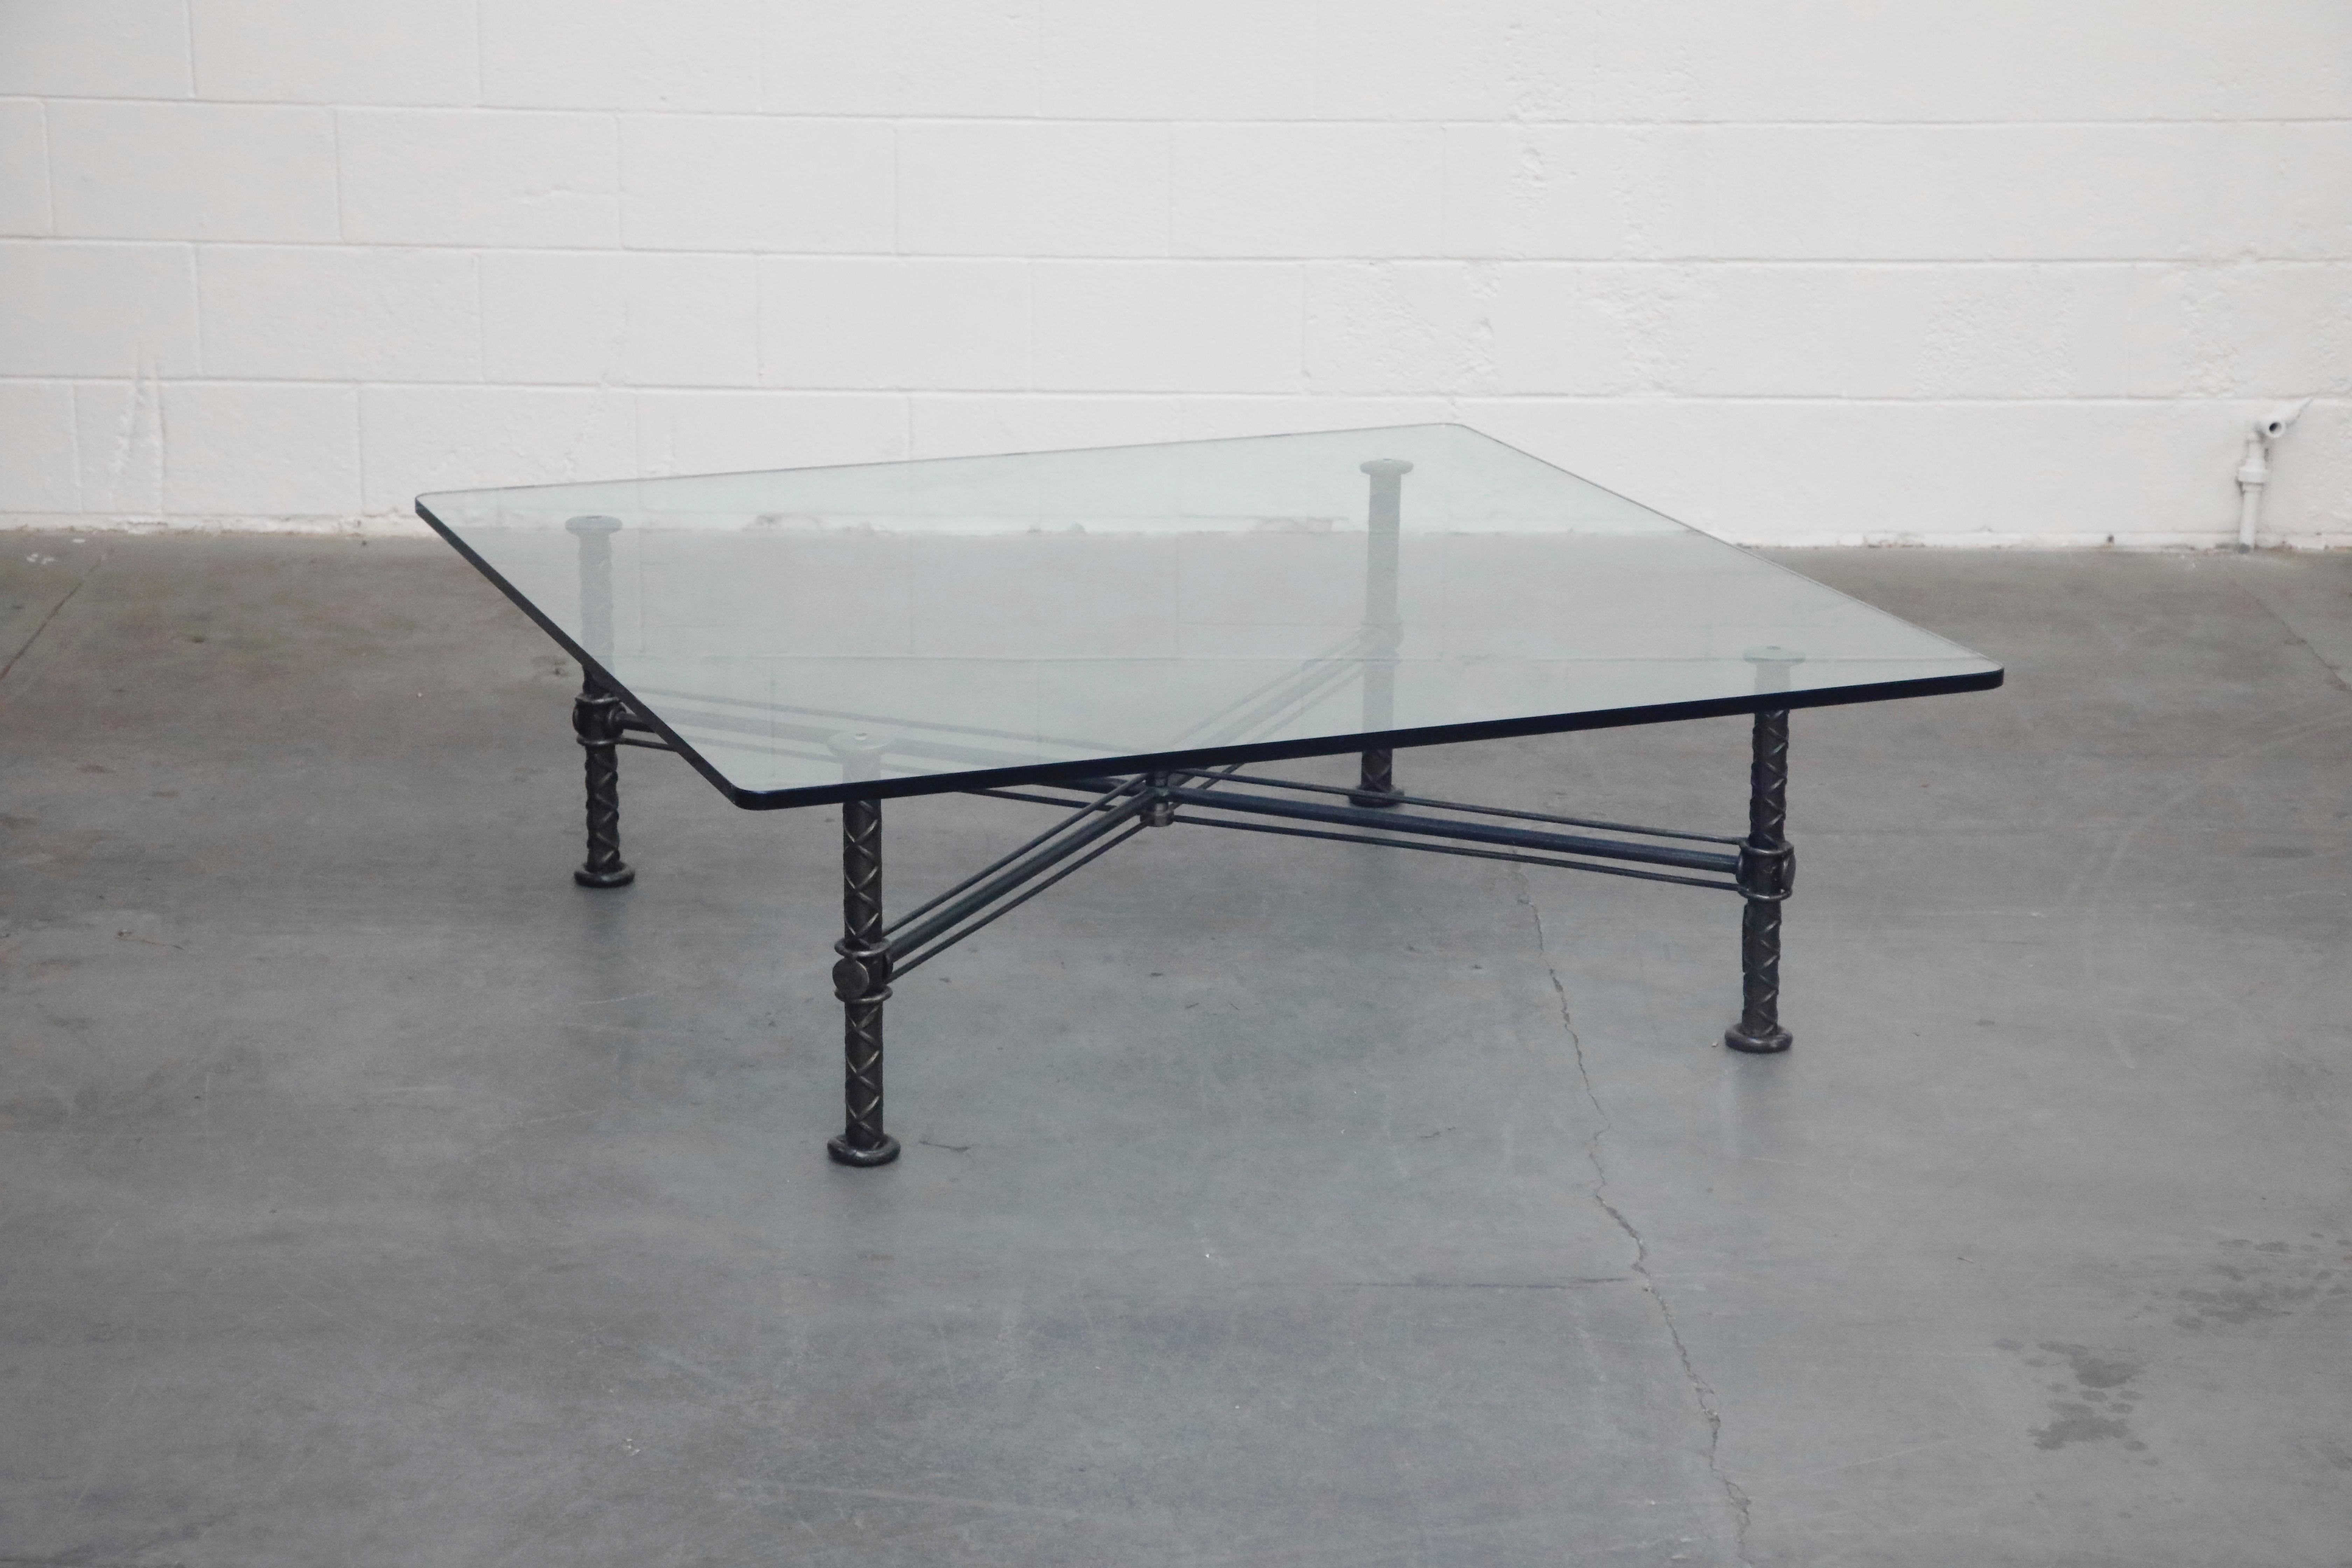 Israeli Sculpted Steel Coffee Table by Ilana Goor, Signed and Numbered Edition